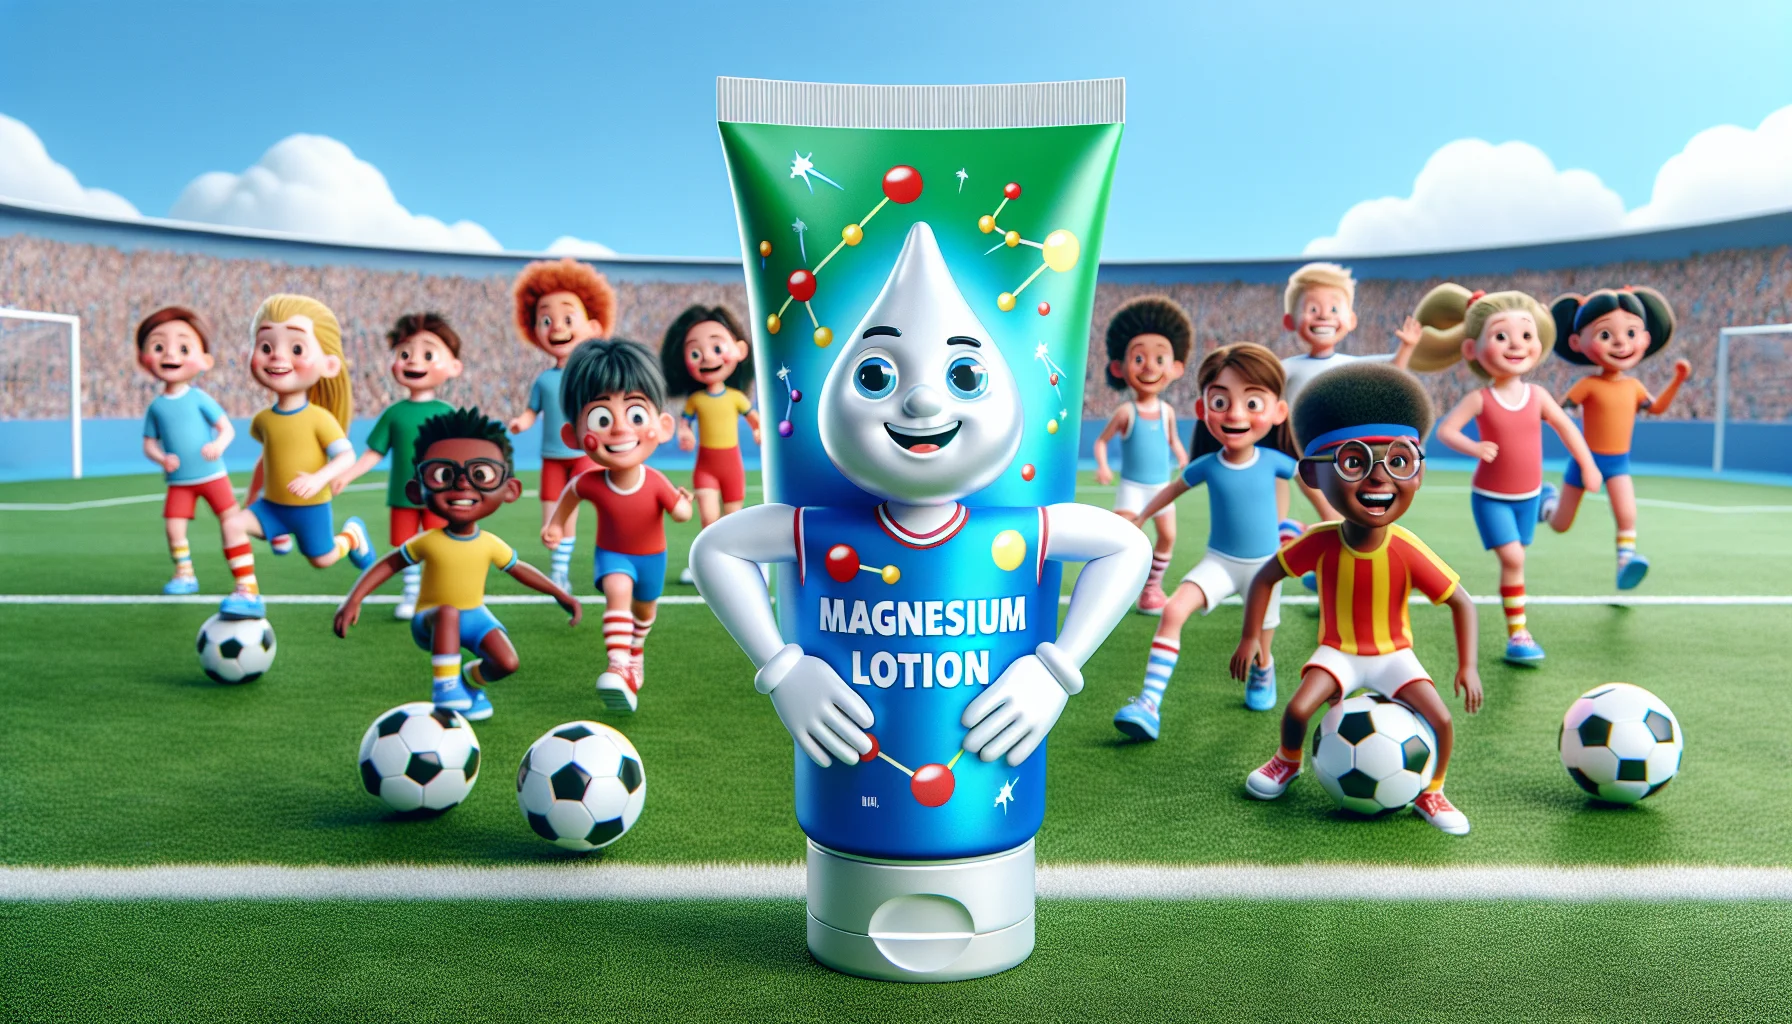 Create a realistic image of a playful scene. In the foreground, there is a bottle of magnesium lotion targeted at kids. The bottle is vibrantly colored and labelled with fun, sporty cartoons. It stands atop a green soccer field. A friendly looking anthropomorphic mascot, perhaps a smiling magnesium atom wearing a sports jersey, stands beside it exuding waves of energy. In the background, children of diverse descents such as Caucasian, Hispanic, and South Asian, both boys and girls, are engaging in different sports activities, like football, badminton, and track and field, appearing enthusiastic and energetic.